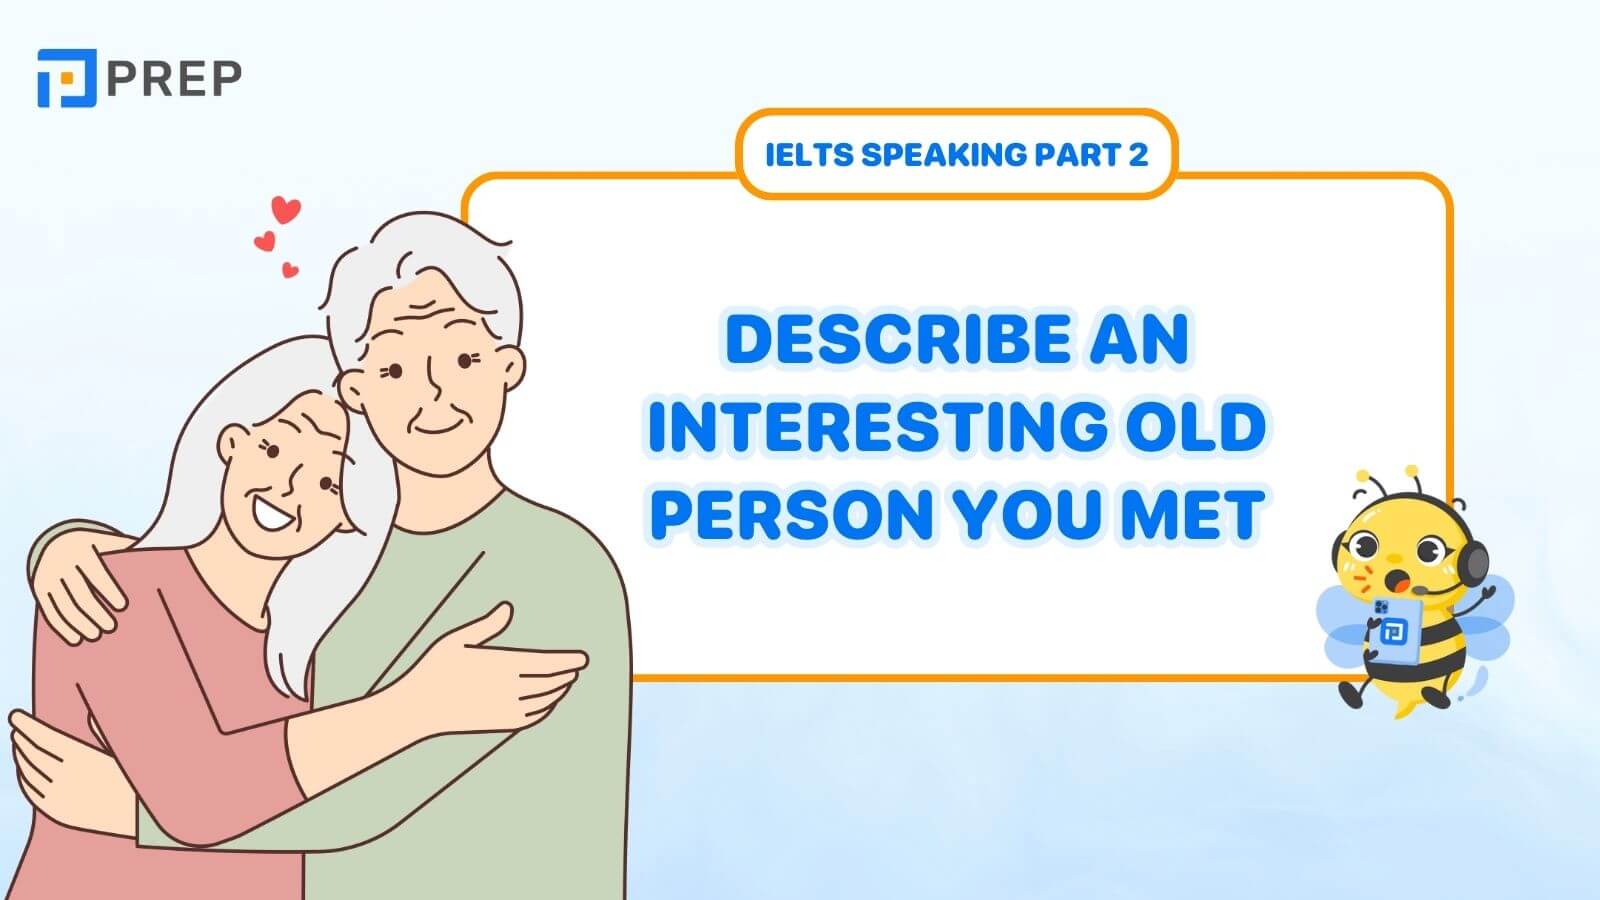 Describe an interesting old person you met